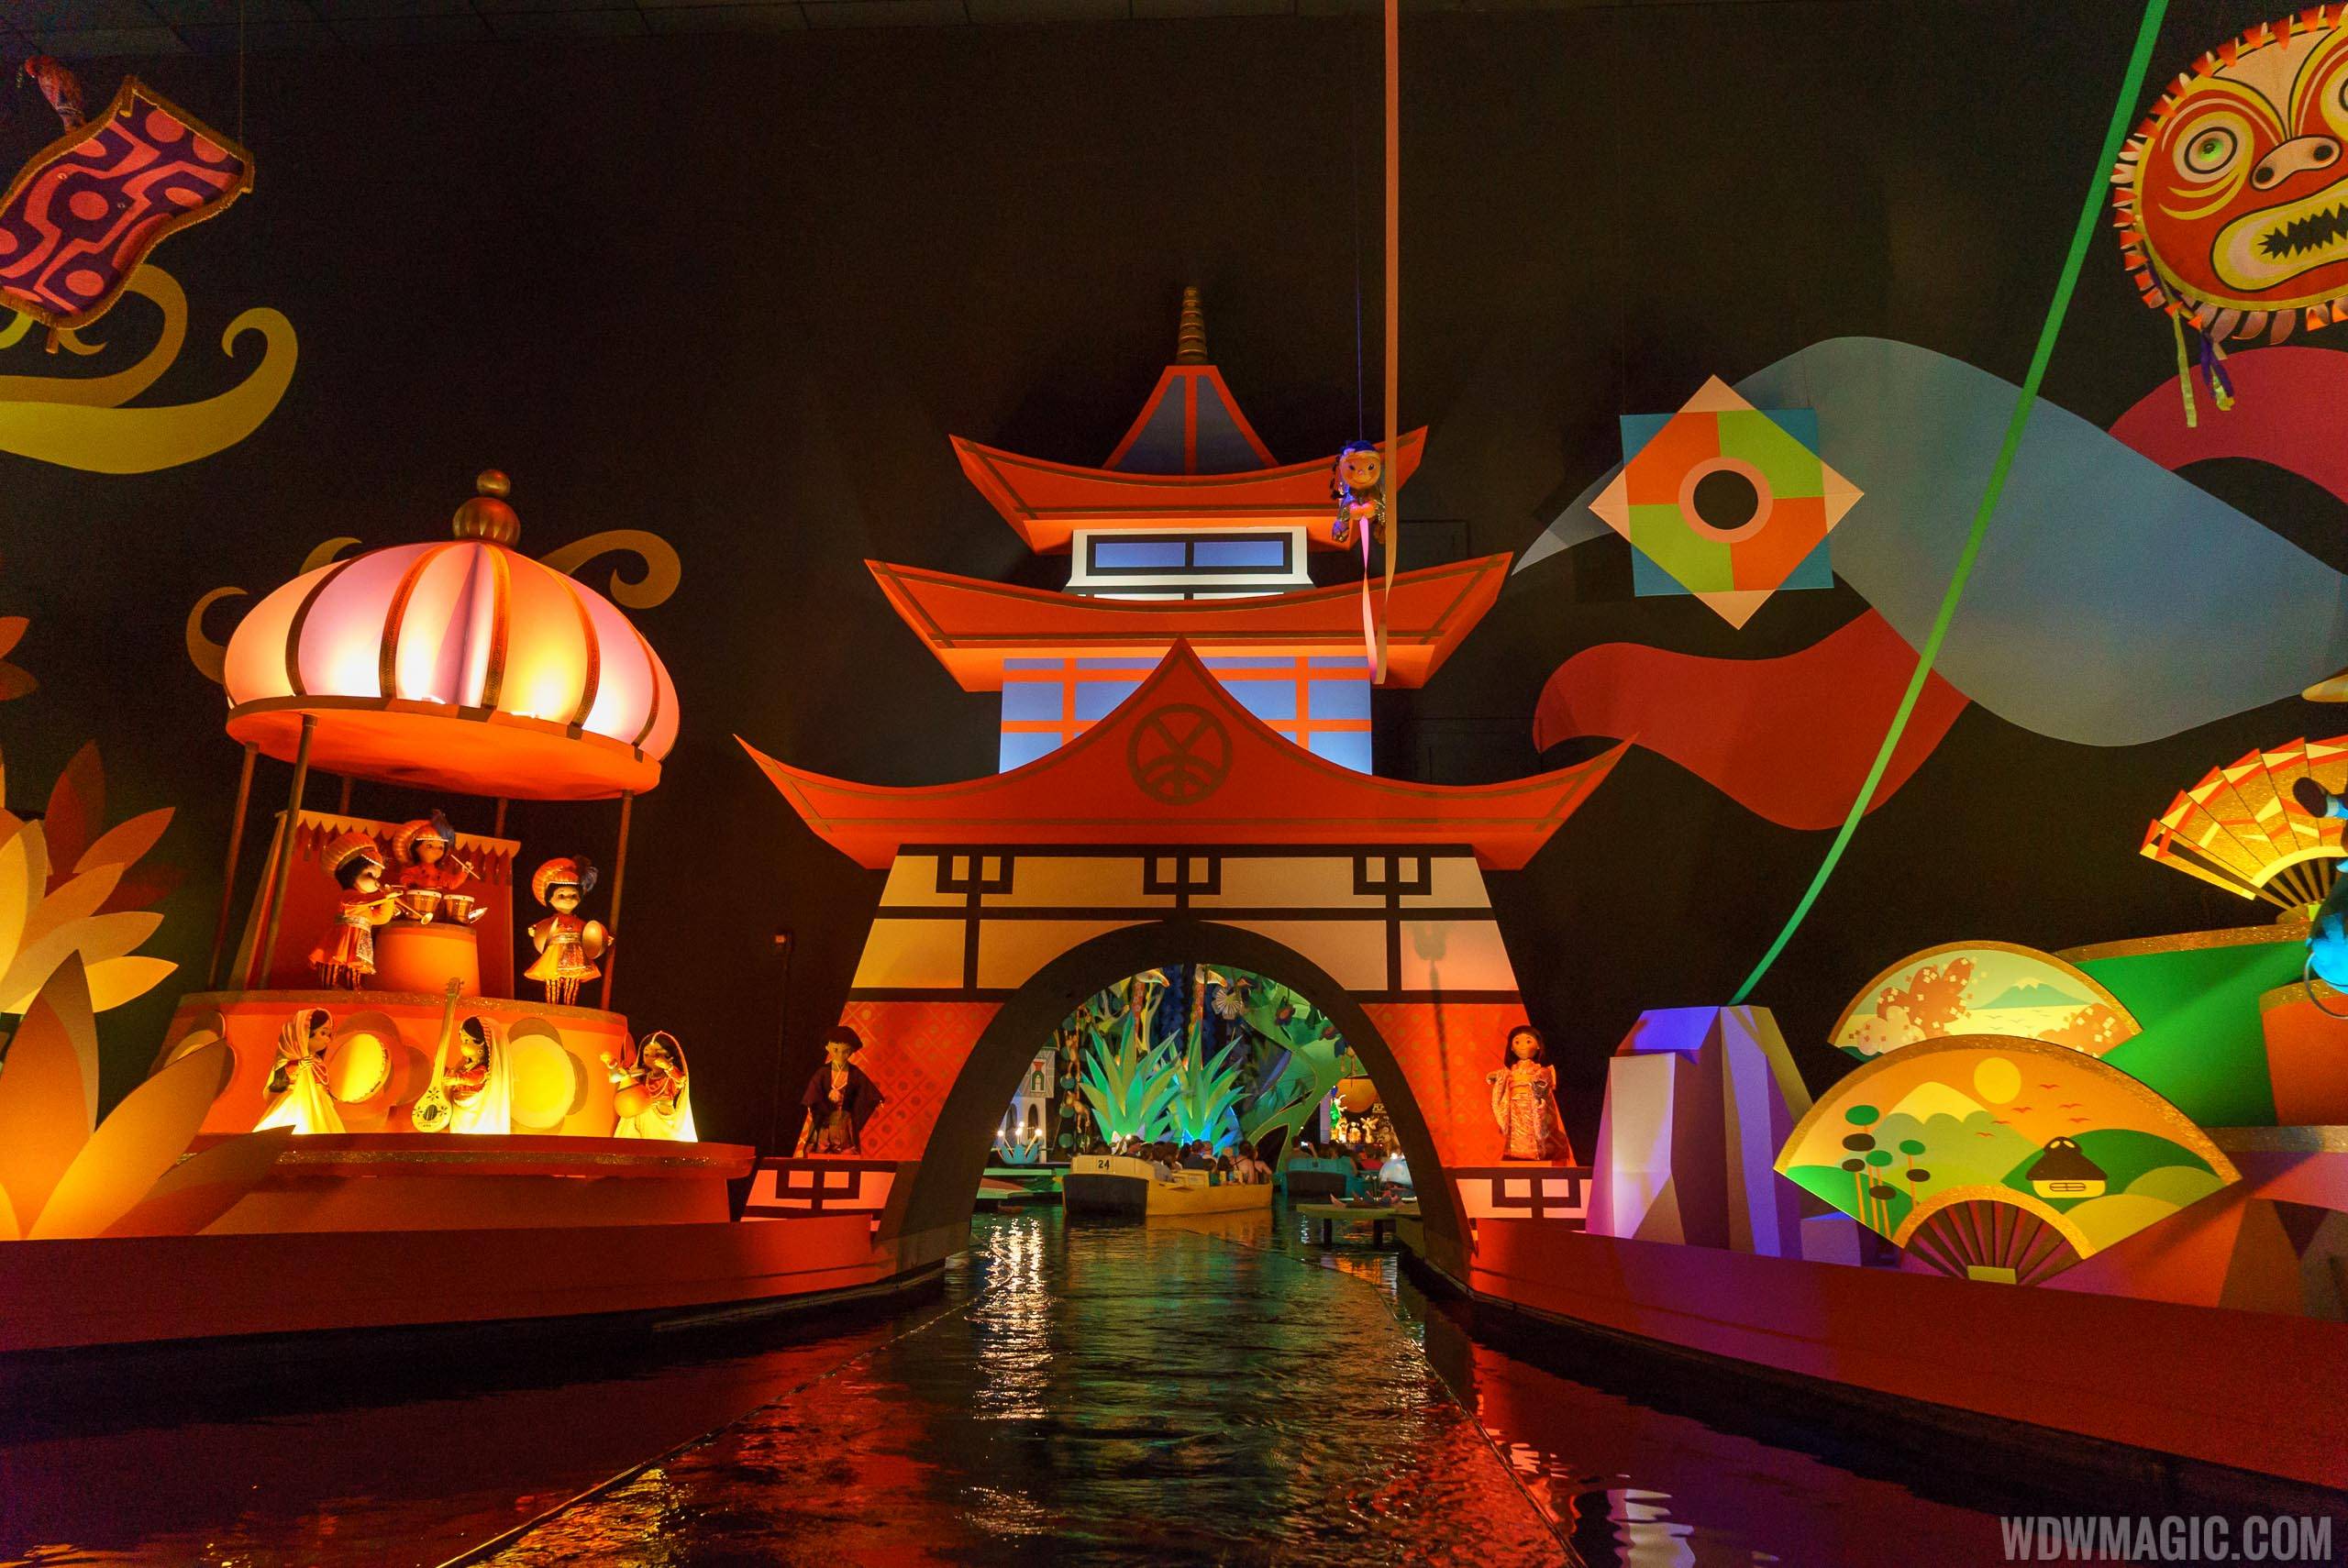 it's a small world closing for short refurbishment in December